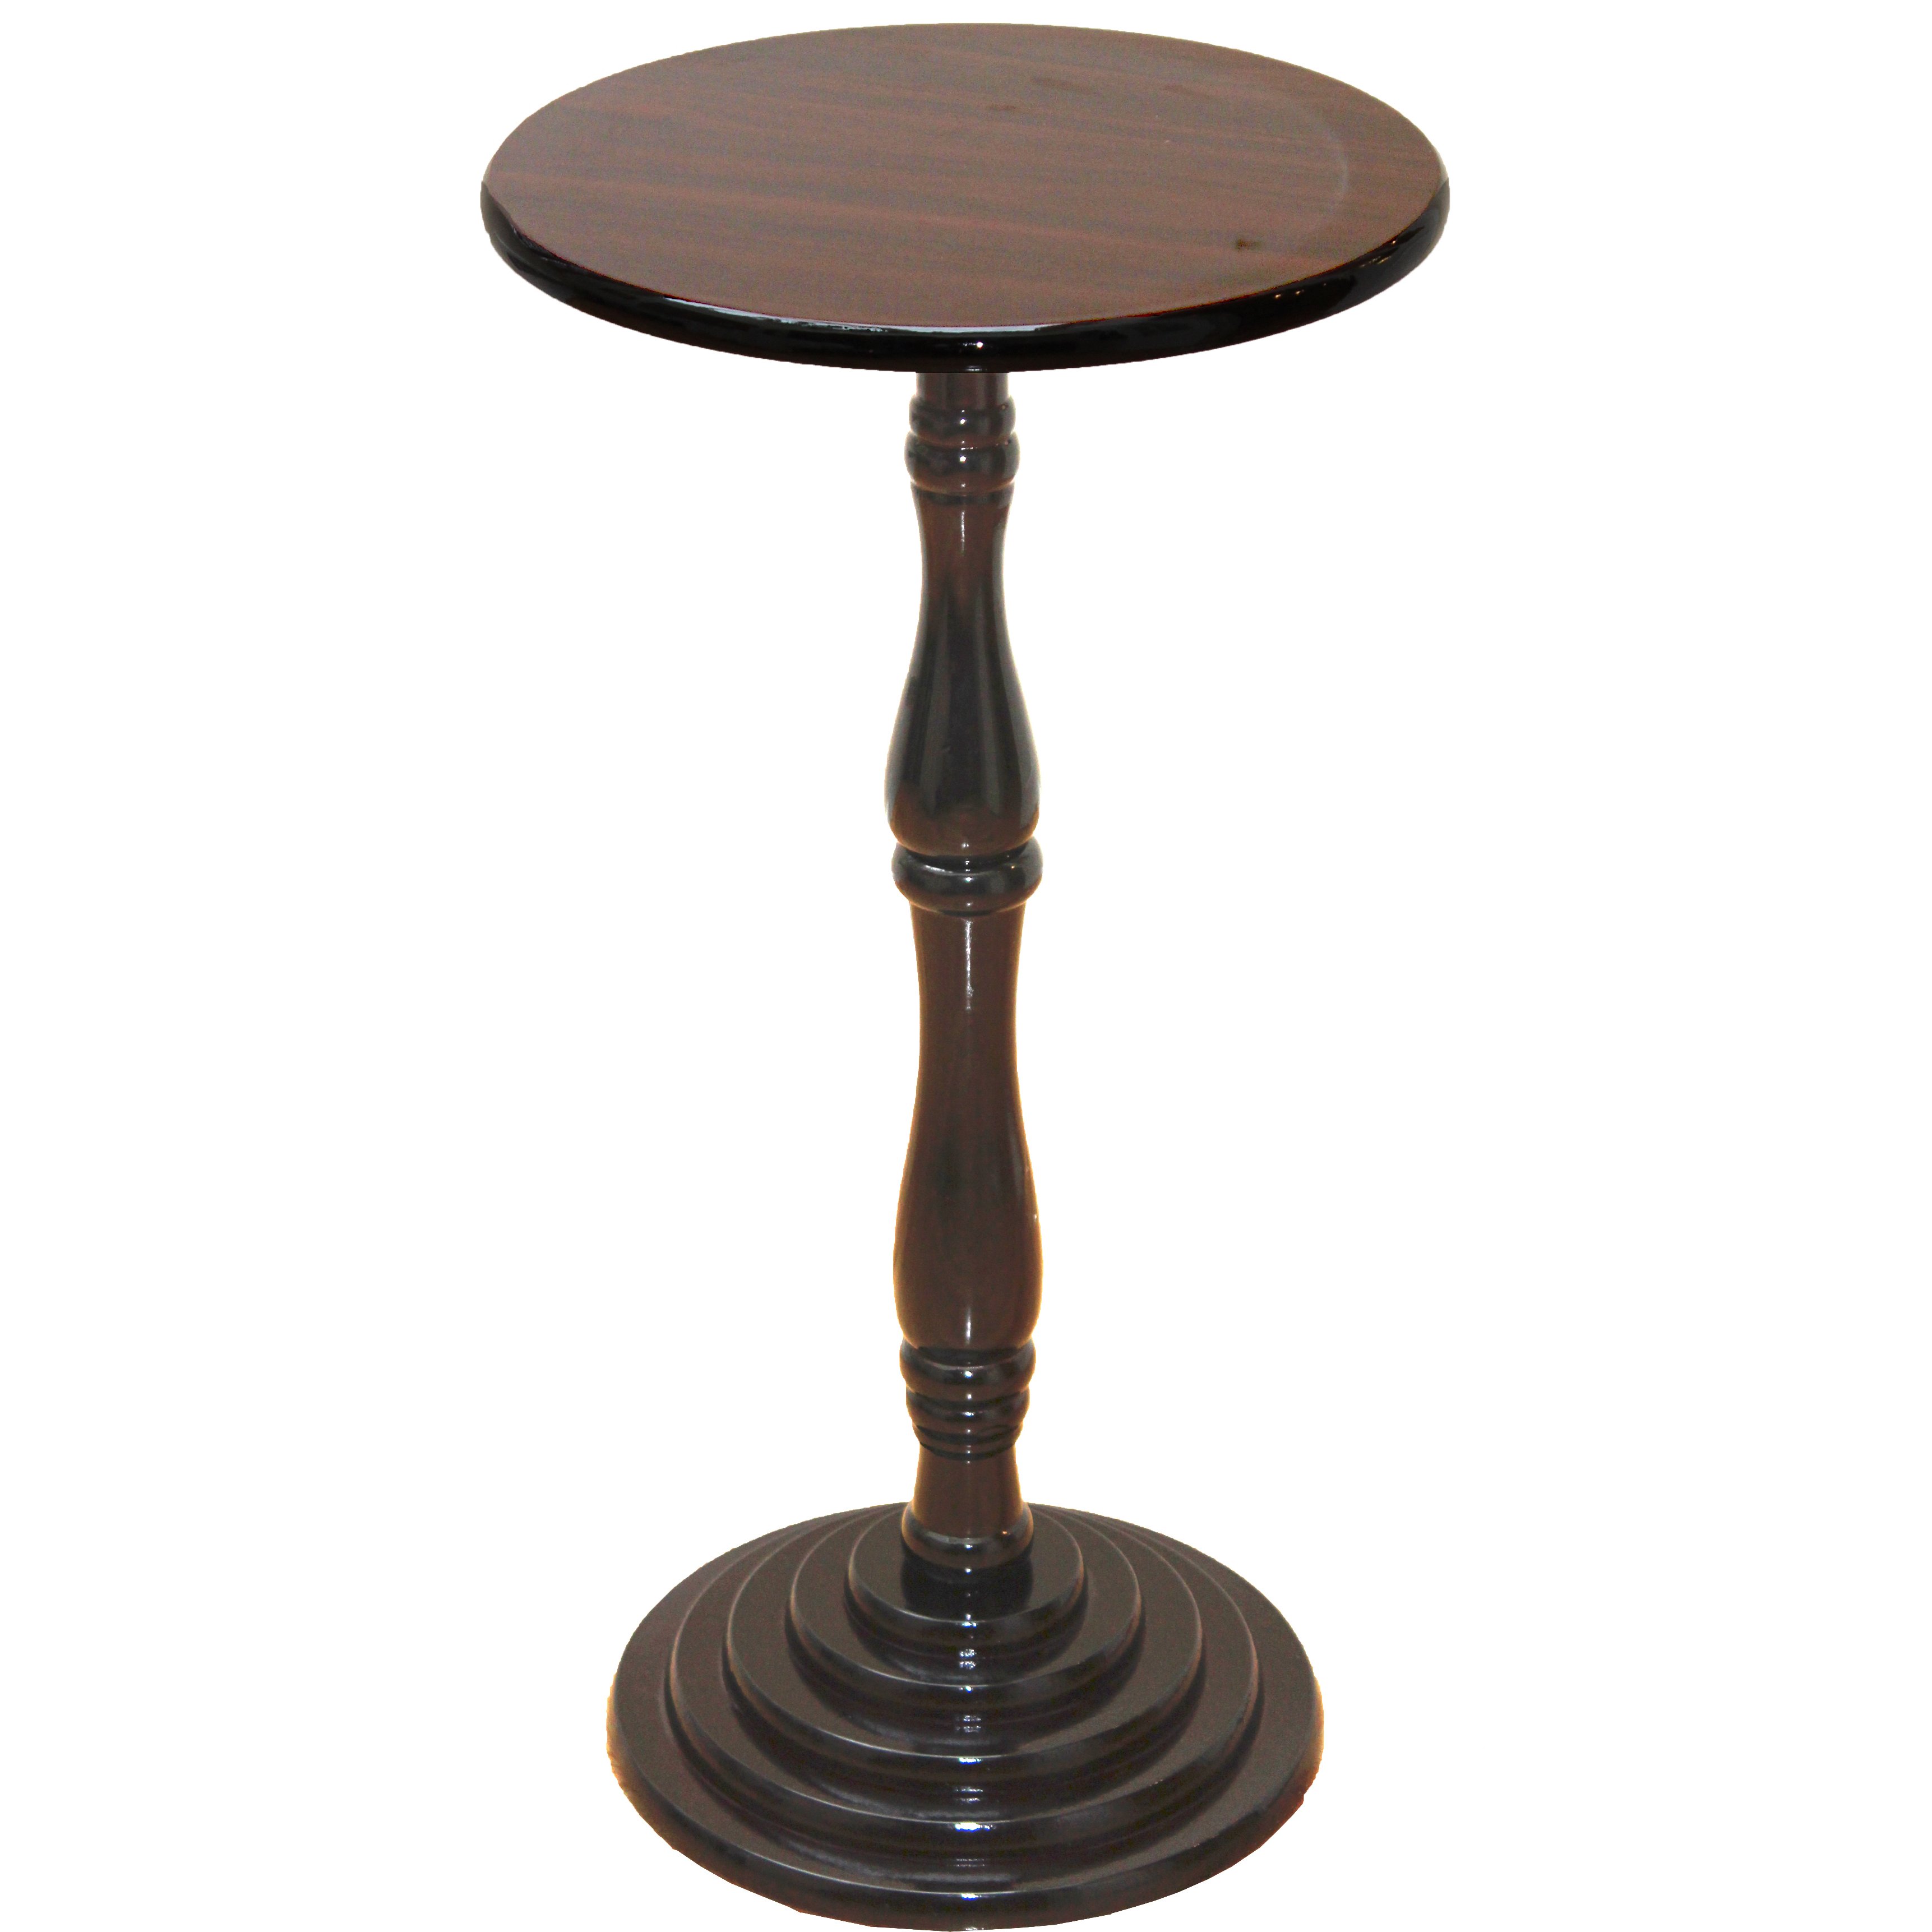 espresso round pedestal accent side end table free shipping today hairpin legs console chair center decor small bedroom tables black mirror monarch specialties pier one imports